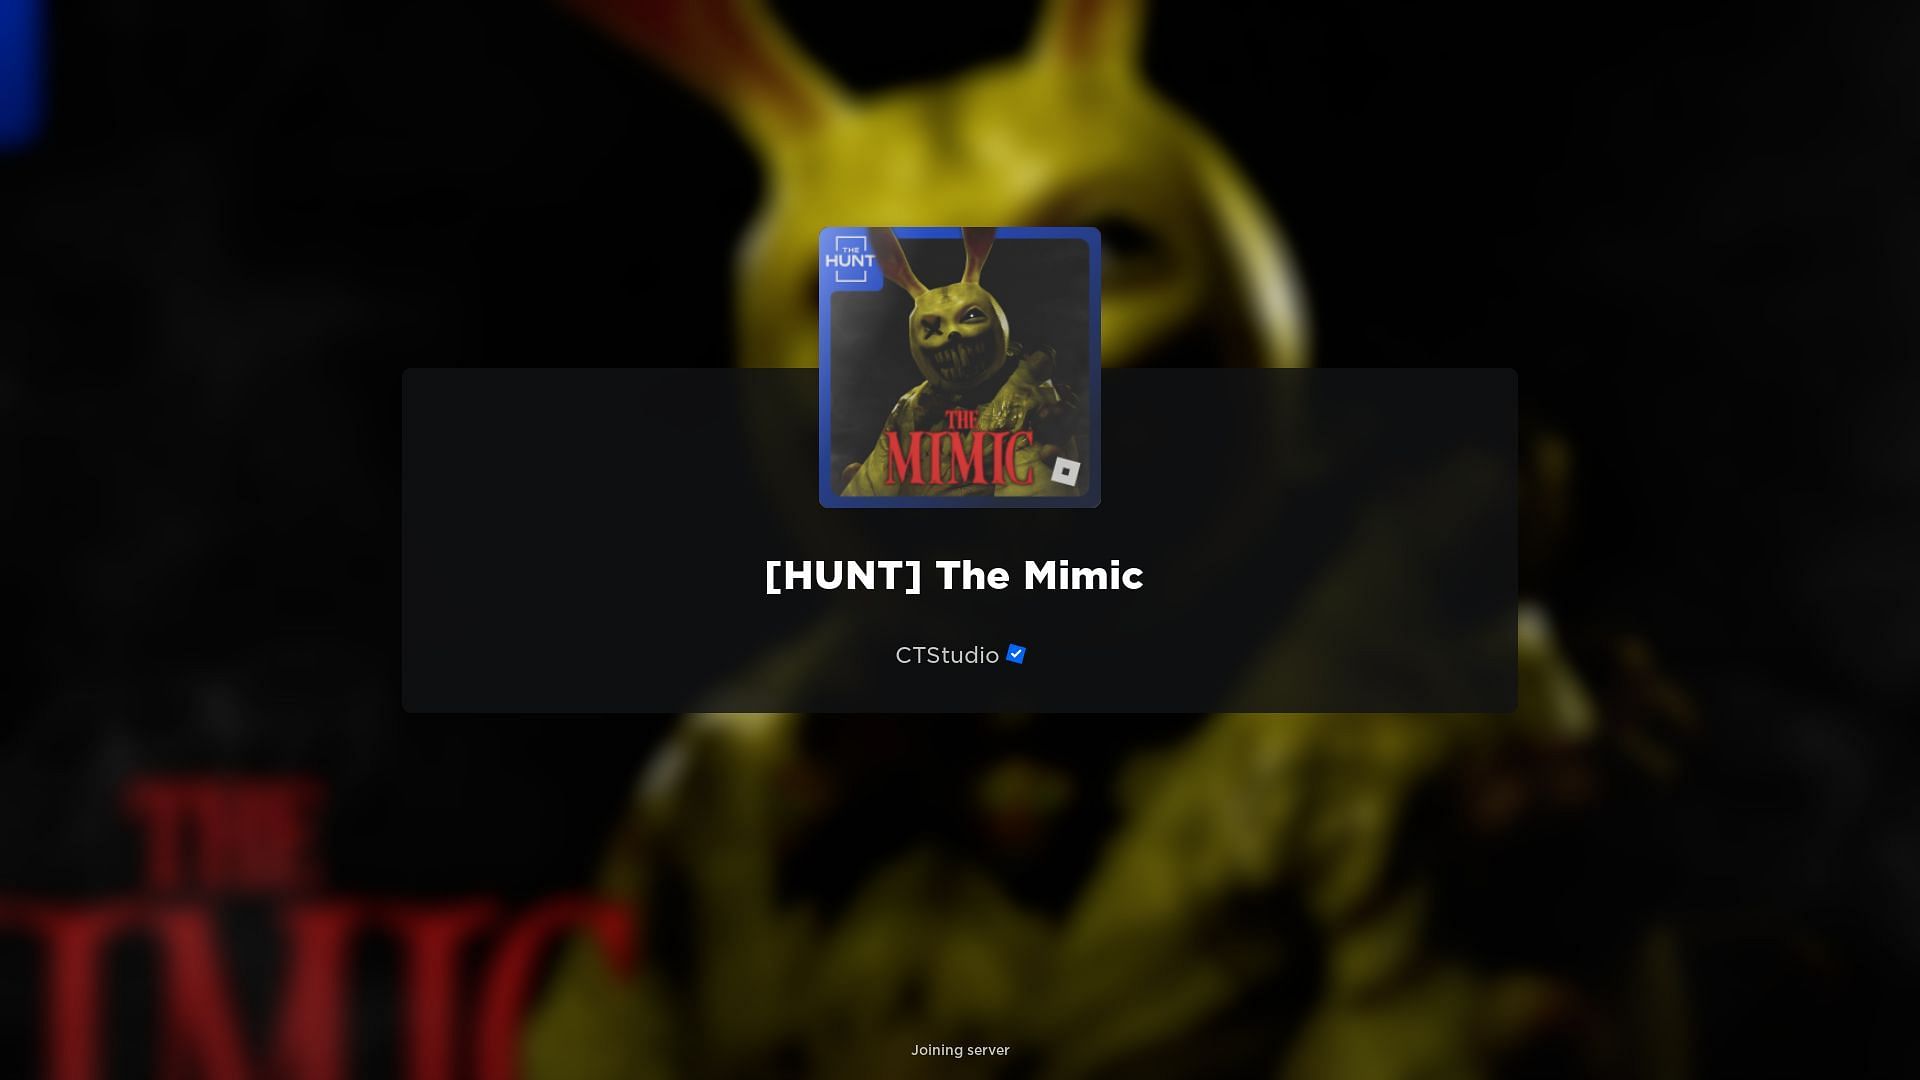 The Hunt in The Mimic